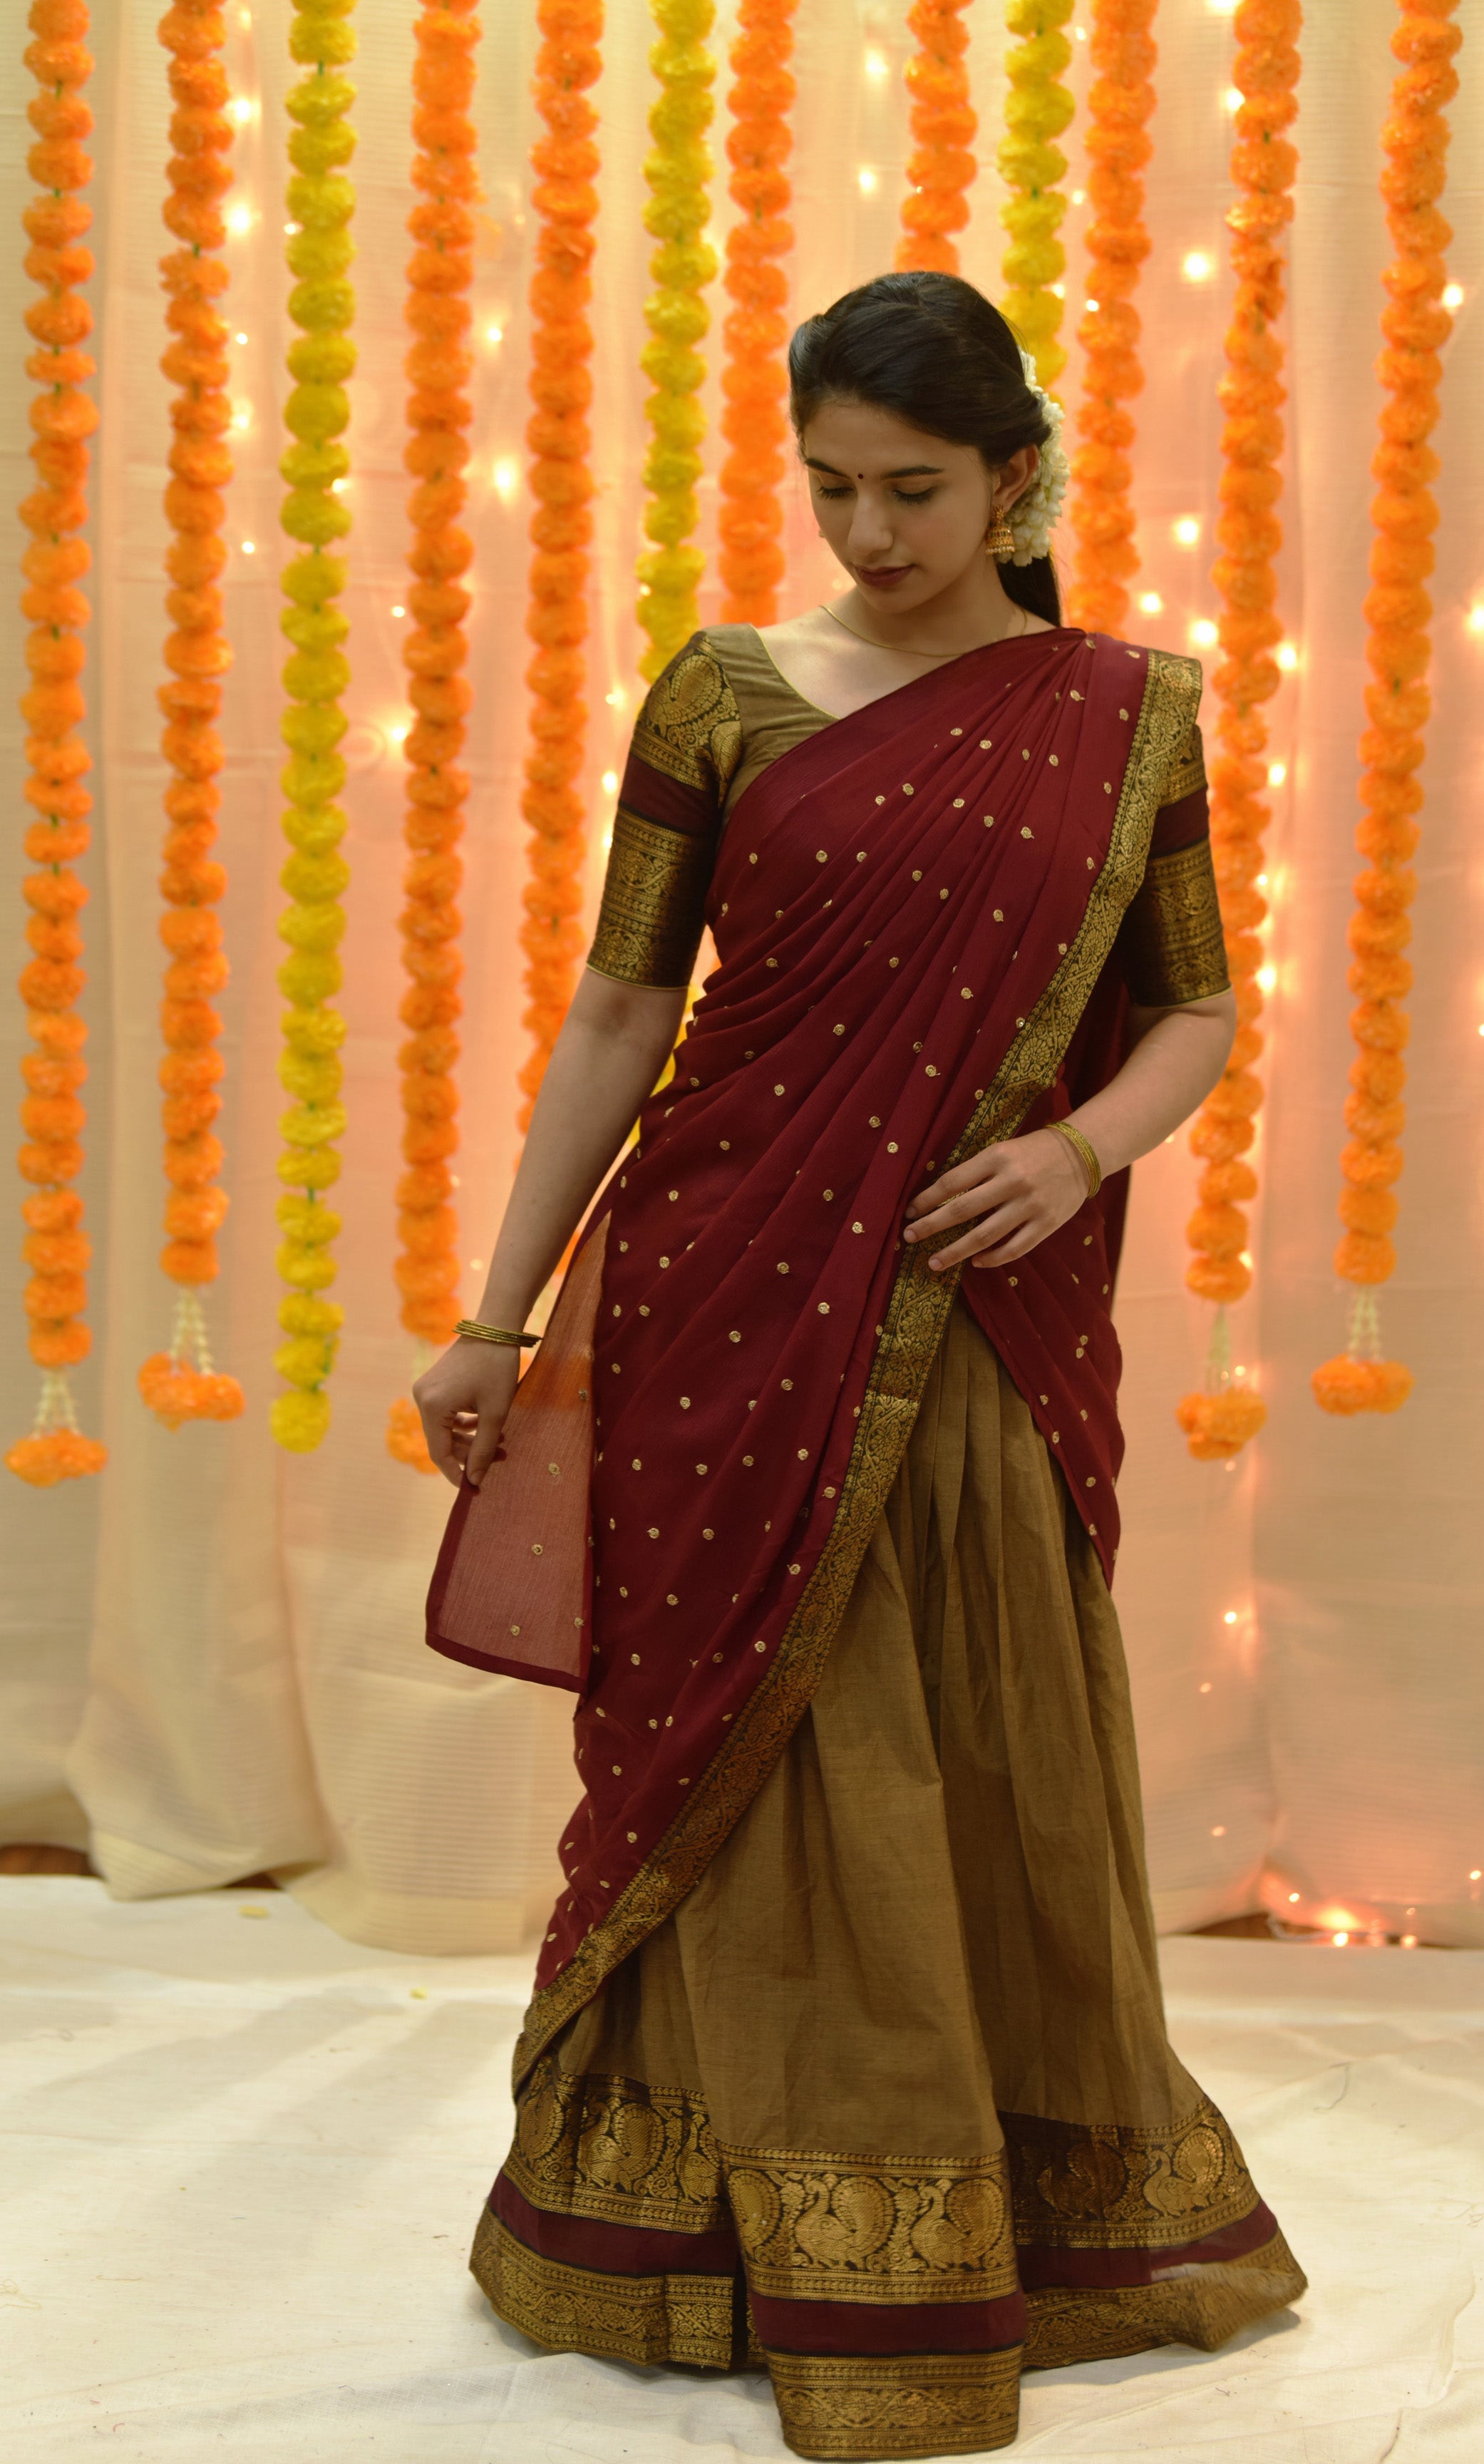 Shop from our extensive collection of traditional half sarees. From casual to party wear, find your perfect saree with us. Shop new model half sarees, fancy half sarees, ready to wear half sarees and more. Find the perfect look for you.